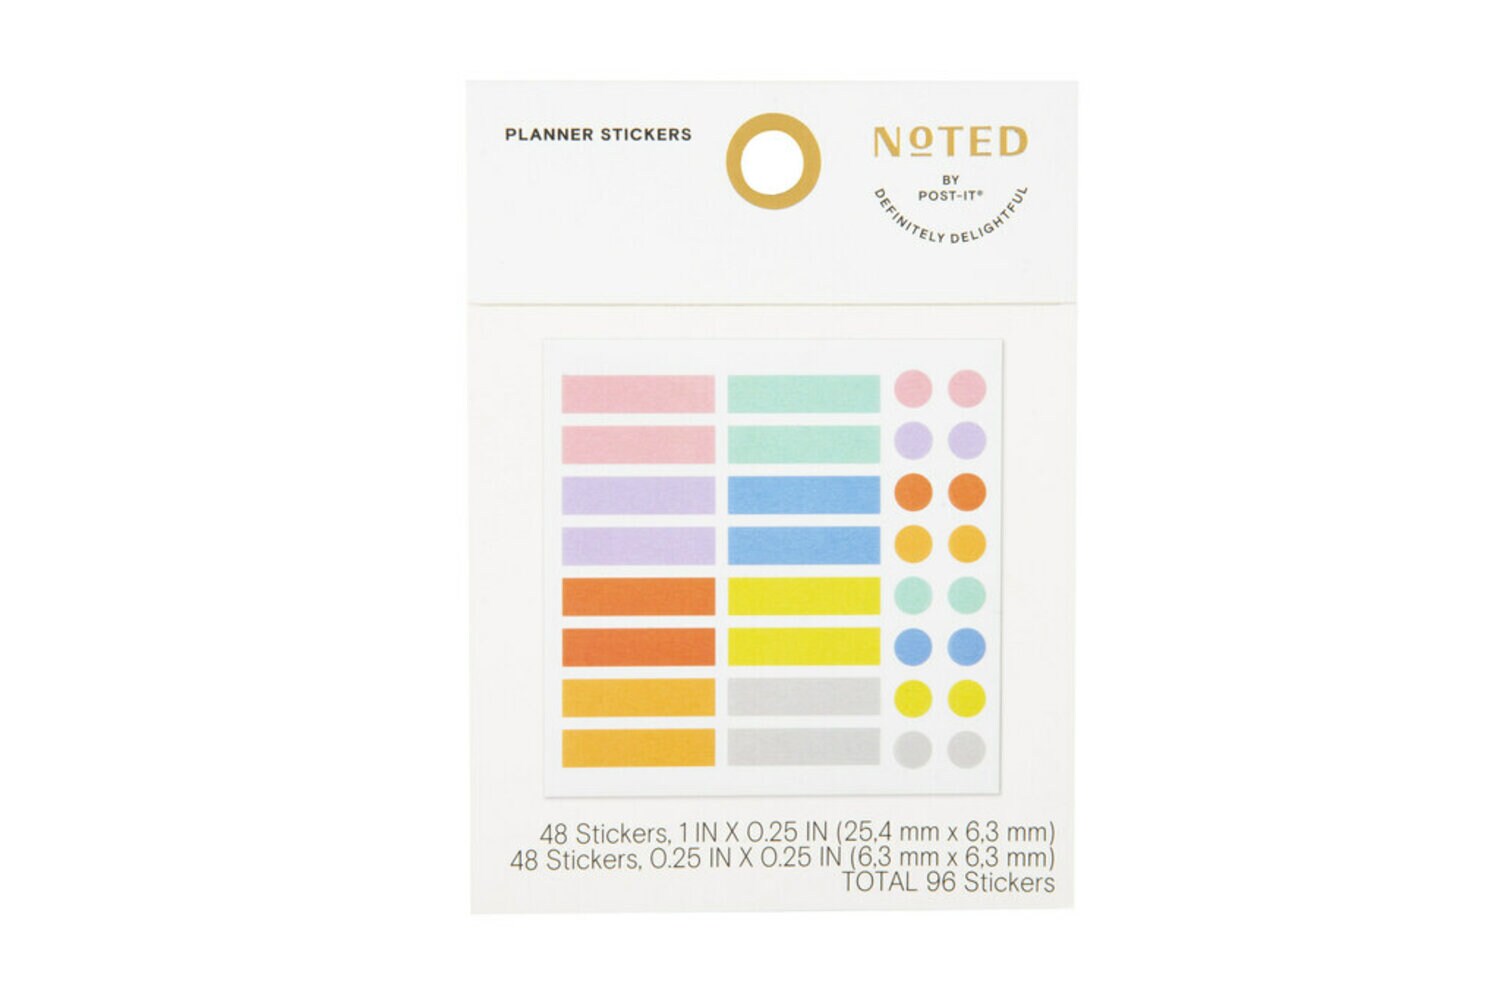 7100264937 - Post-it Planner Stickers NTD5-PS1, 3 sheets, 32 stickers/sheet